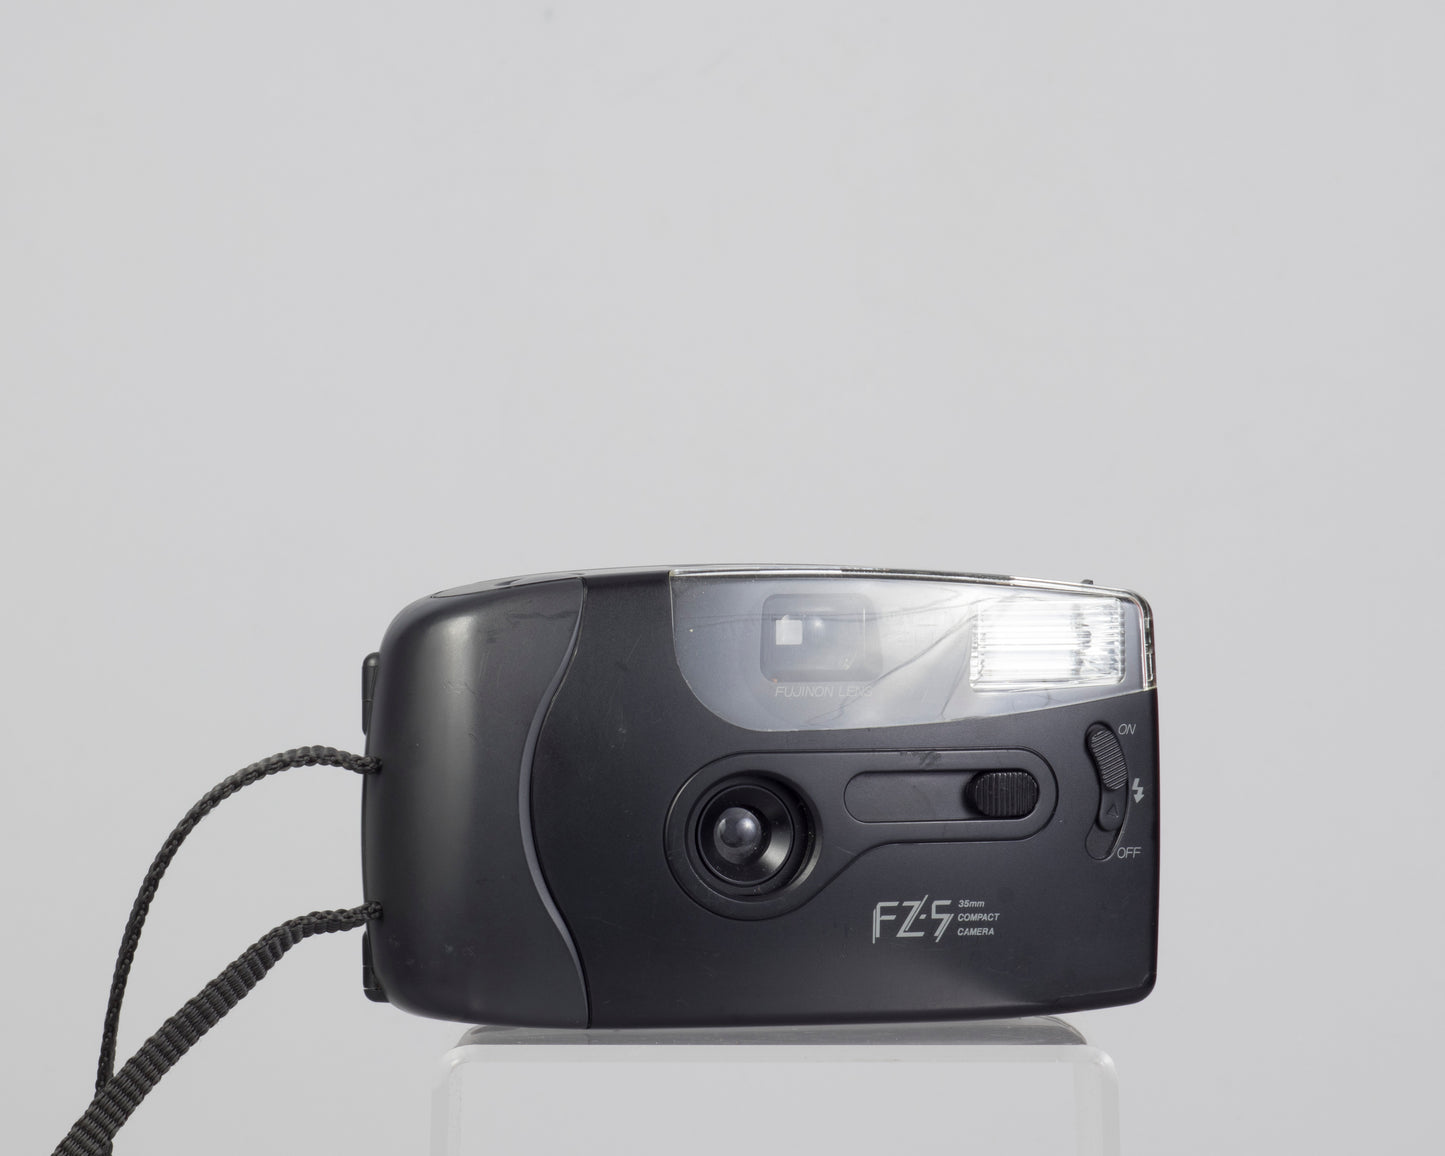 The Fuji FZ-5 is a basic 35mm point-and-shoot from 1989